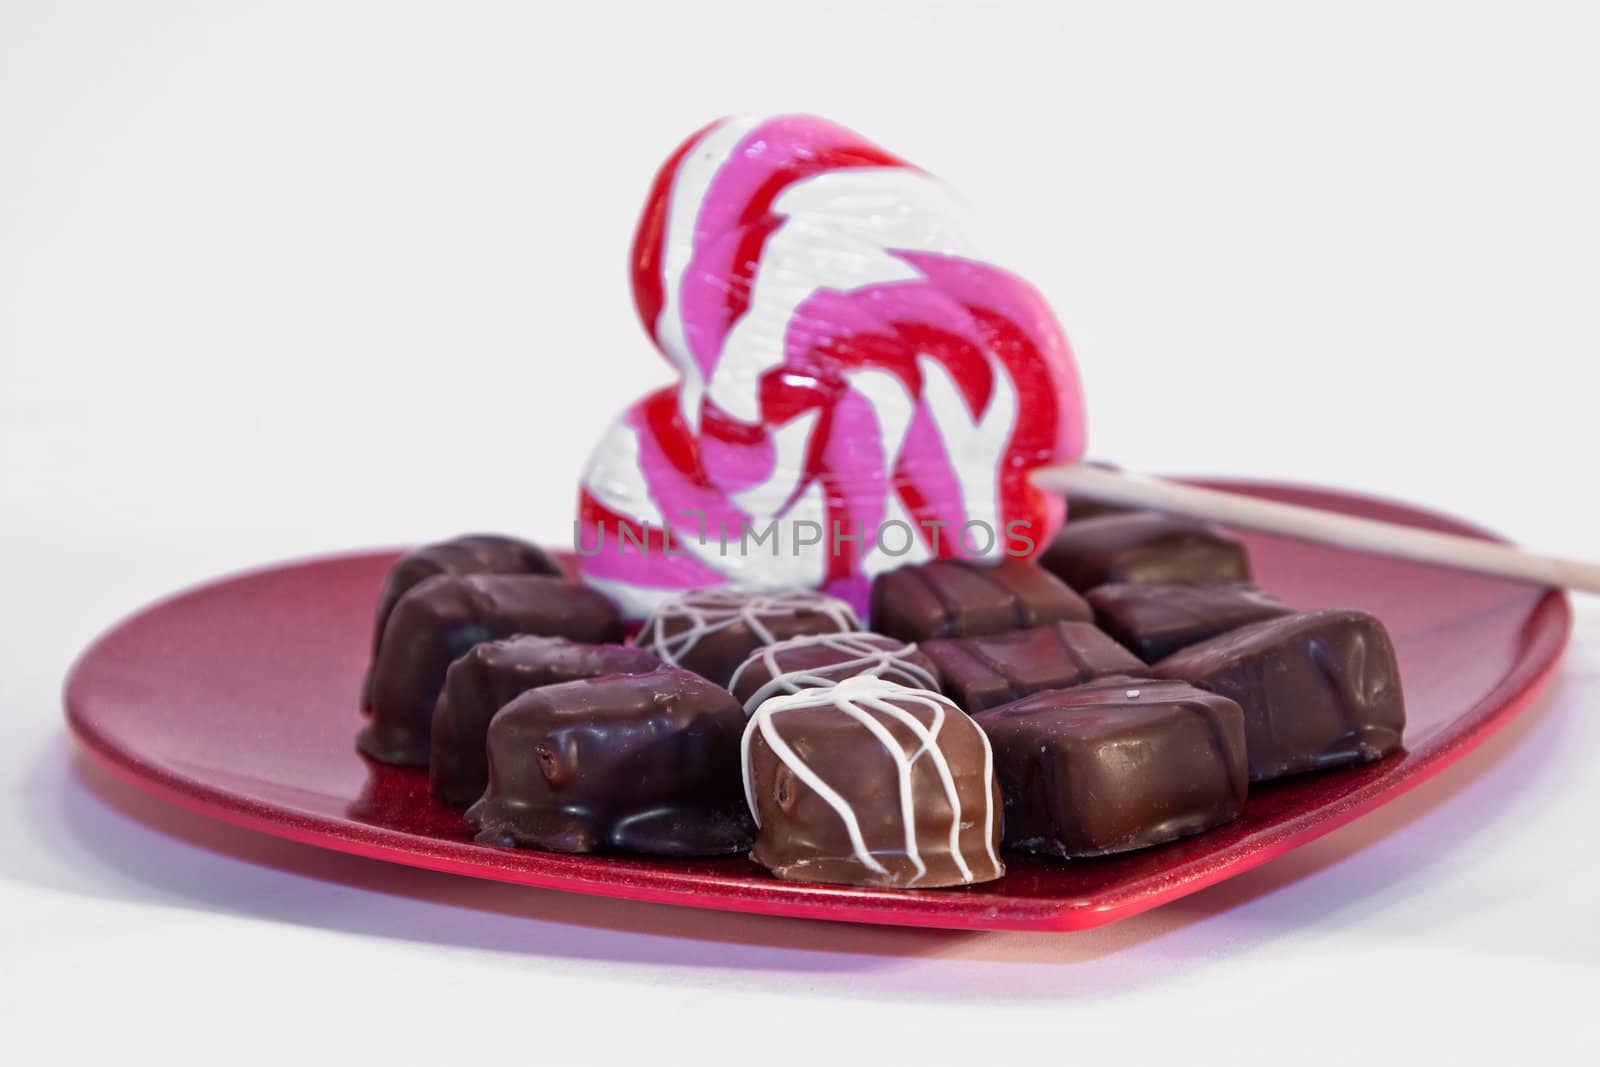 A variety of chocolates with a heart shaped lollipop on a red metallic heart plate isolated on white